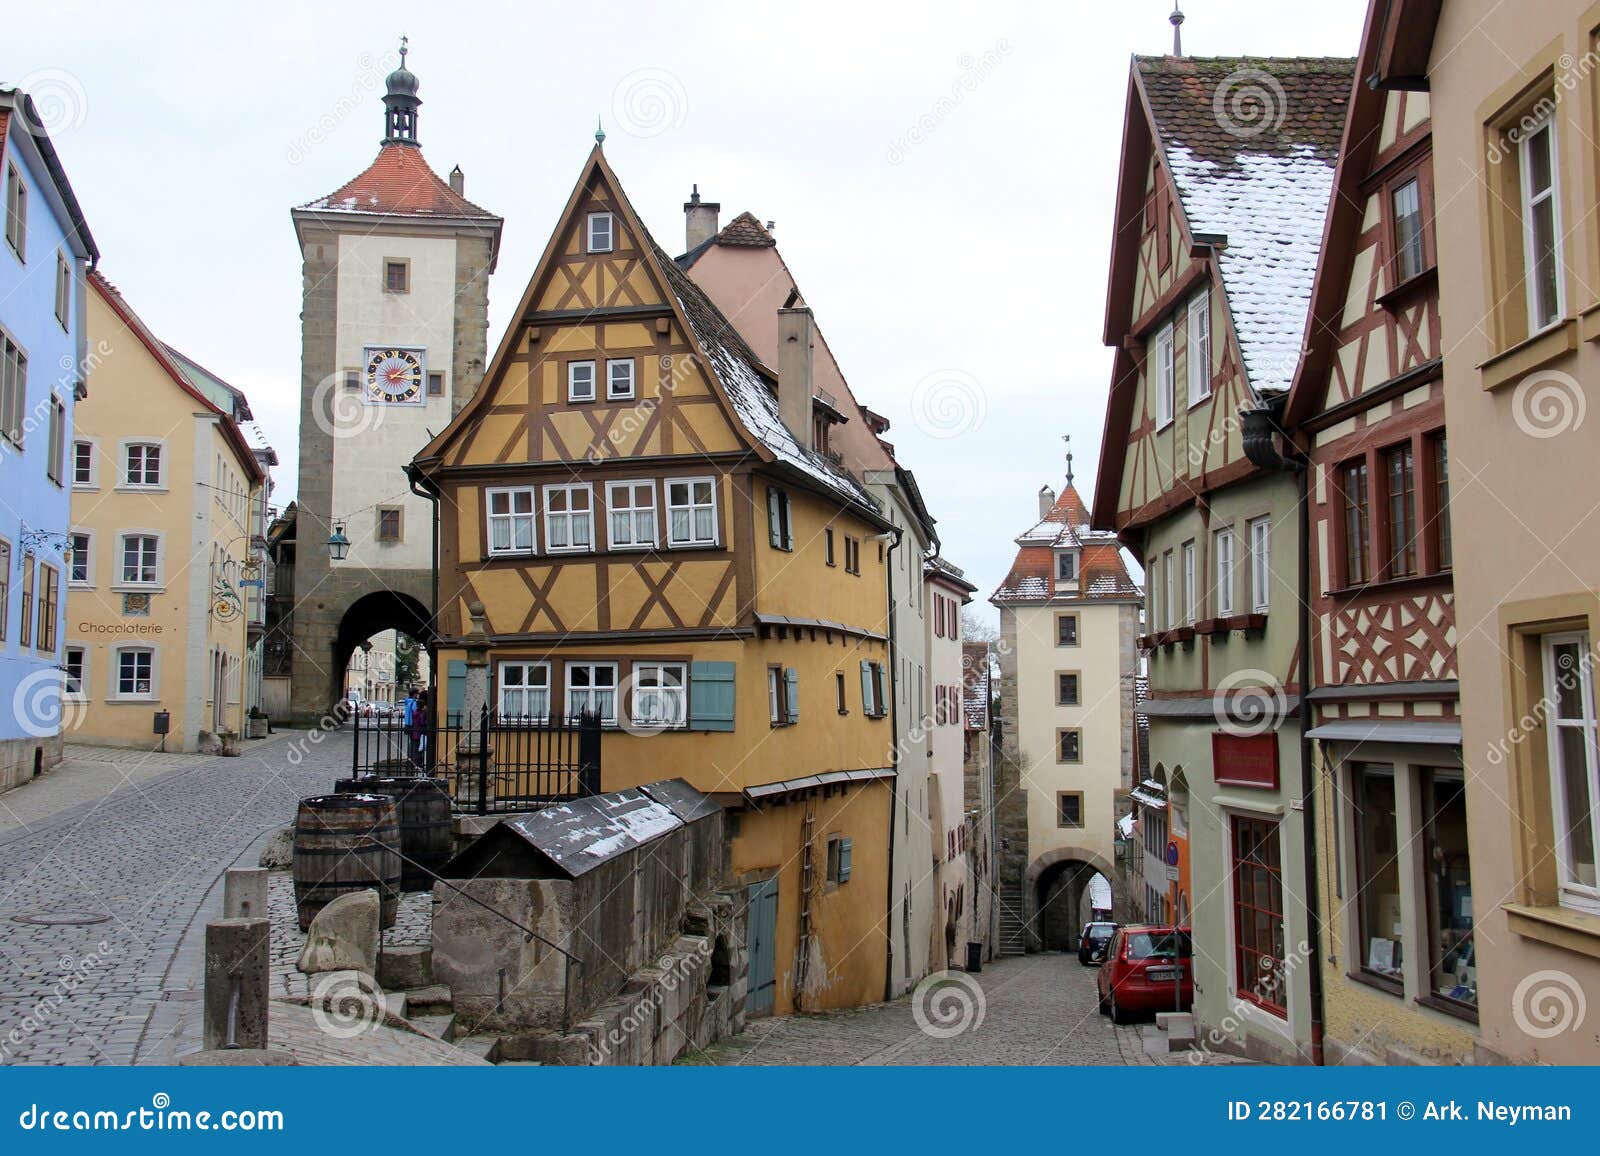 landmark spot in the old town, view on snowless winter afternoon, rothenburg ob der tauber, germany